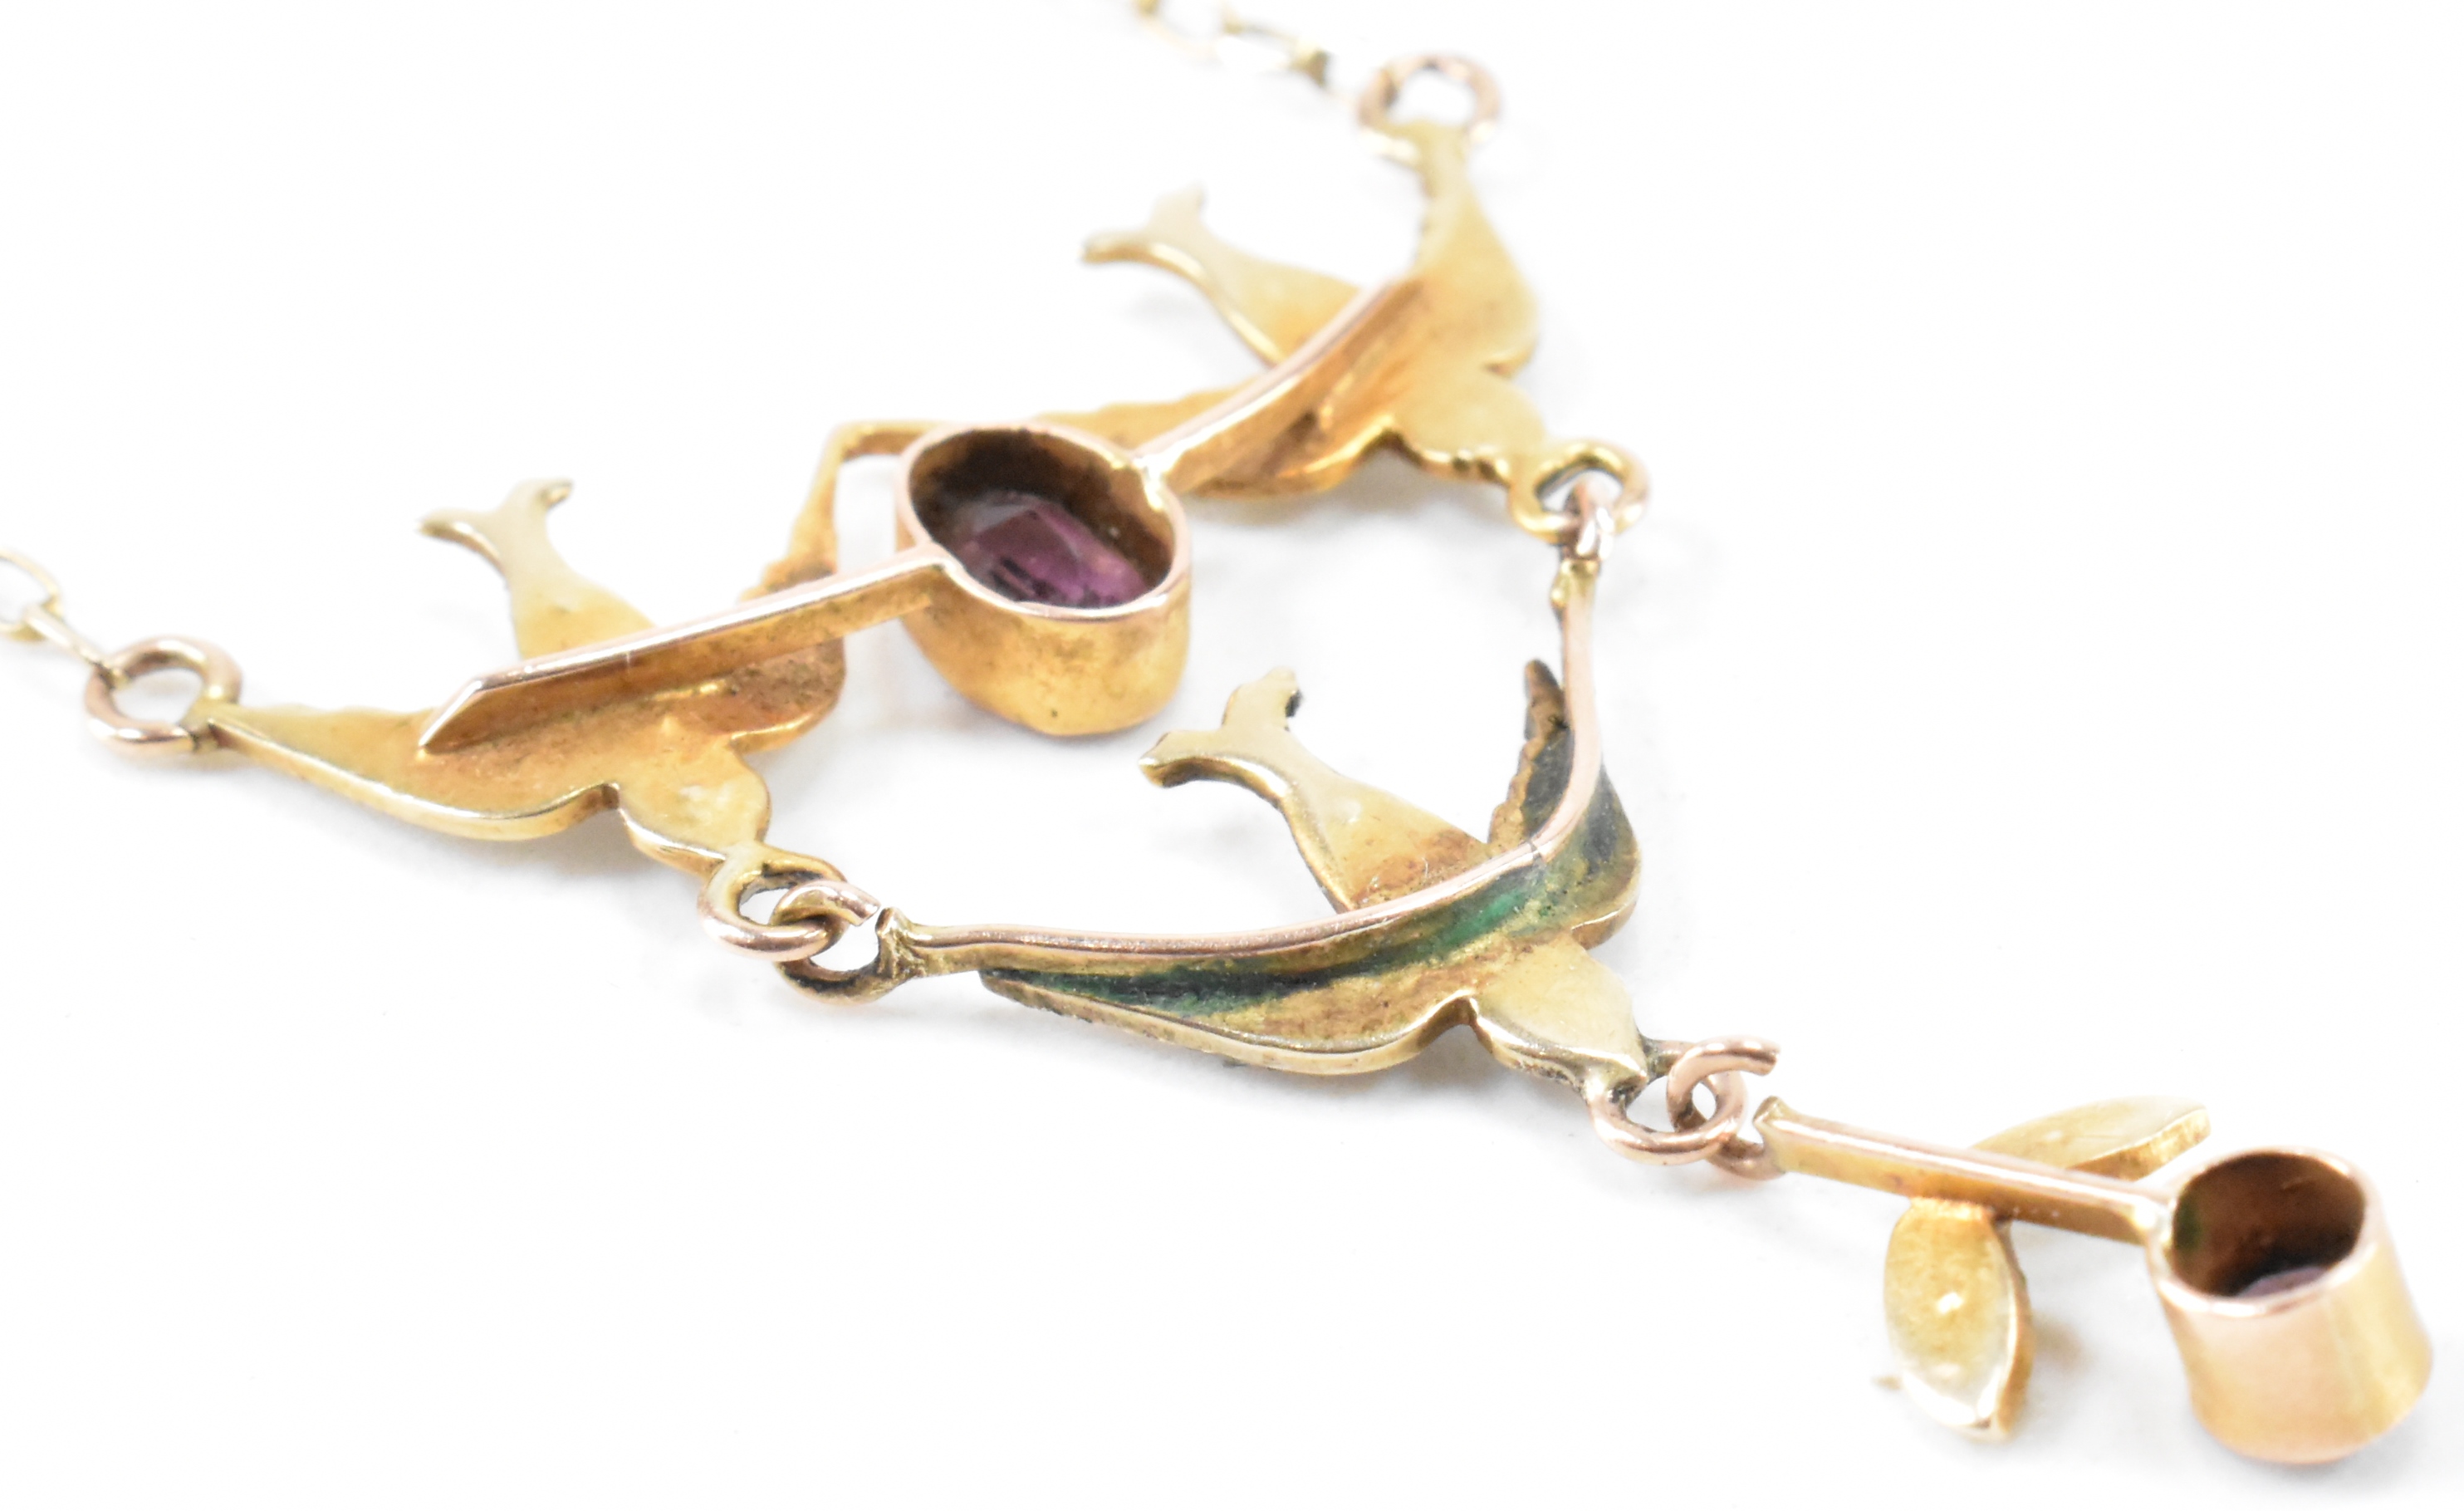 VICTORIAN GOLD SEEDPEARL & PASTE SWALLOW NECKLACE - Image 5 of 9